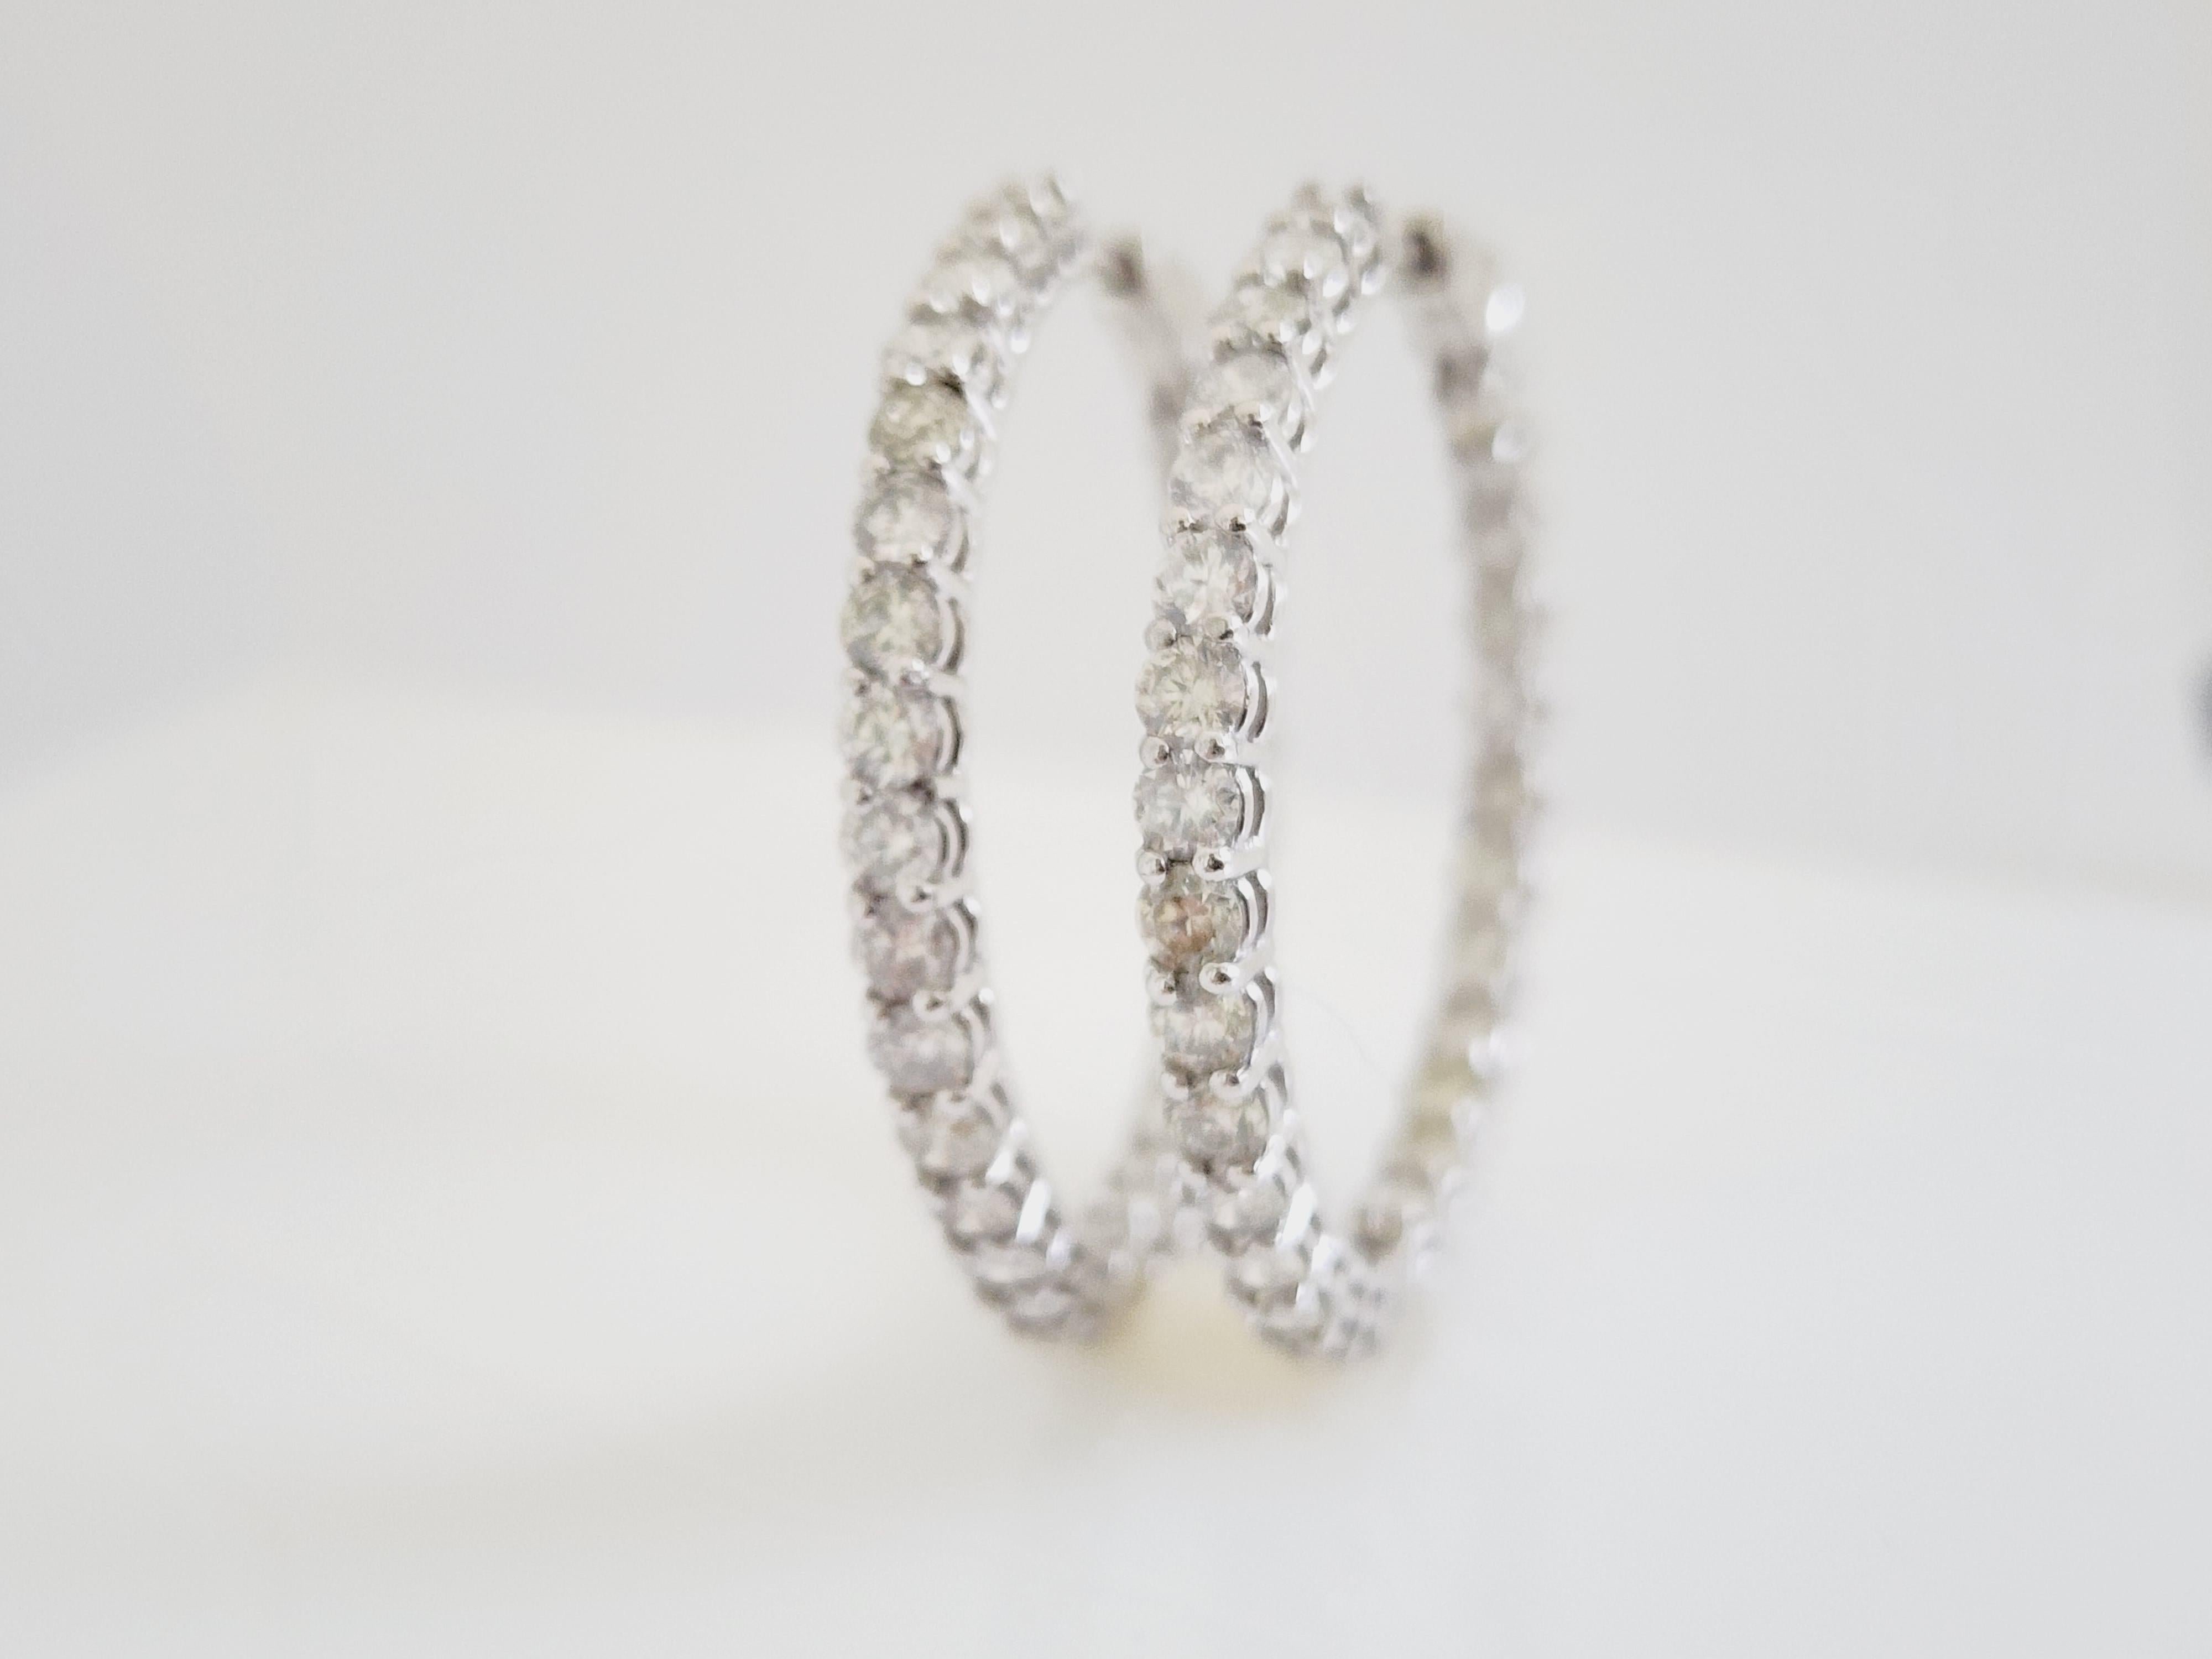 Beautiful pair of natural diamond inside out hoop earrings in 14K white gold. 
Secures with push snap closure for easy wear. 
Average Color I, Clarity SI, 
Measures 1.25 inch diameter. 

*Free shipping within the U.S.*